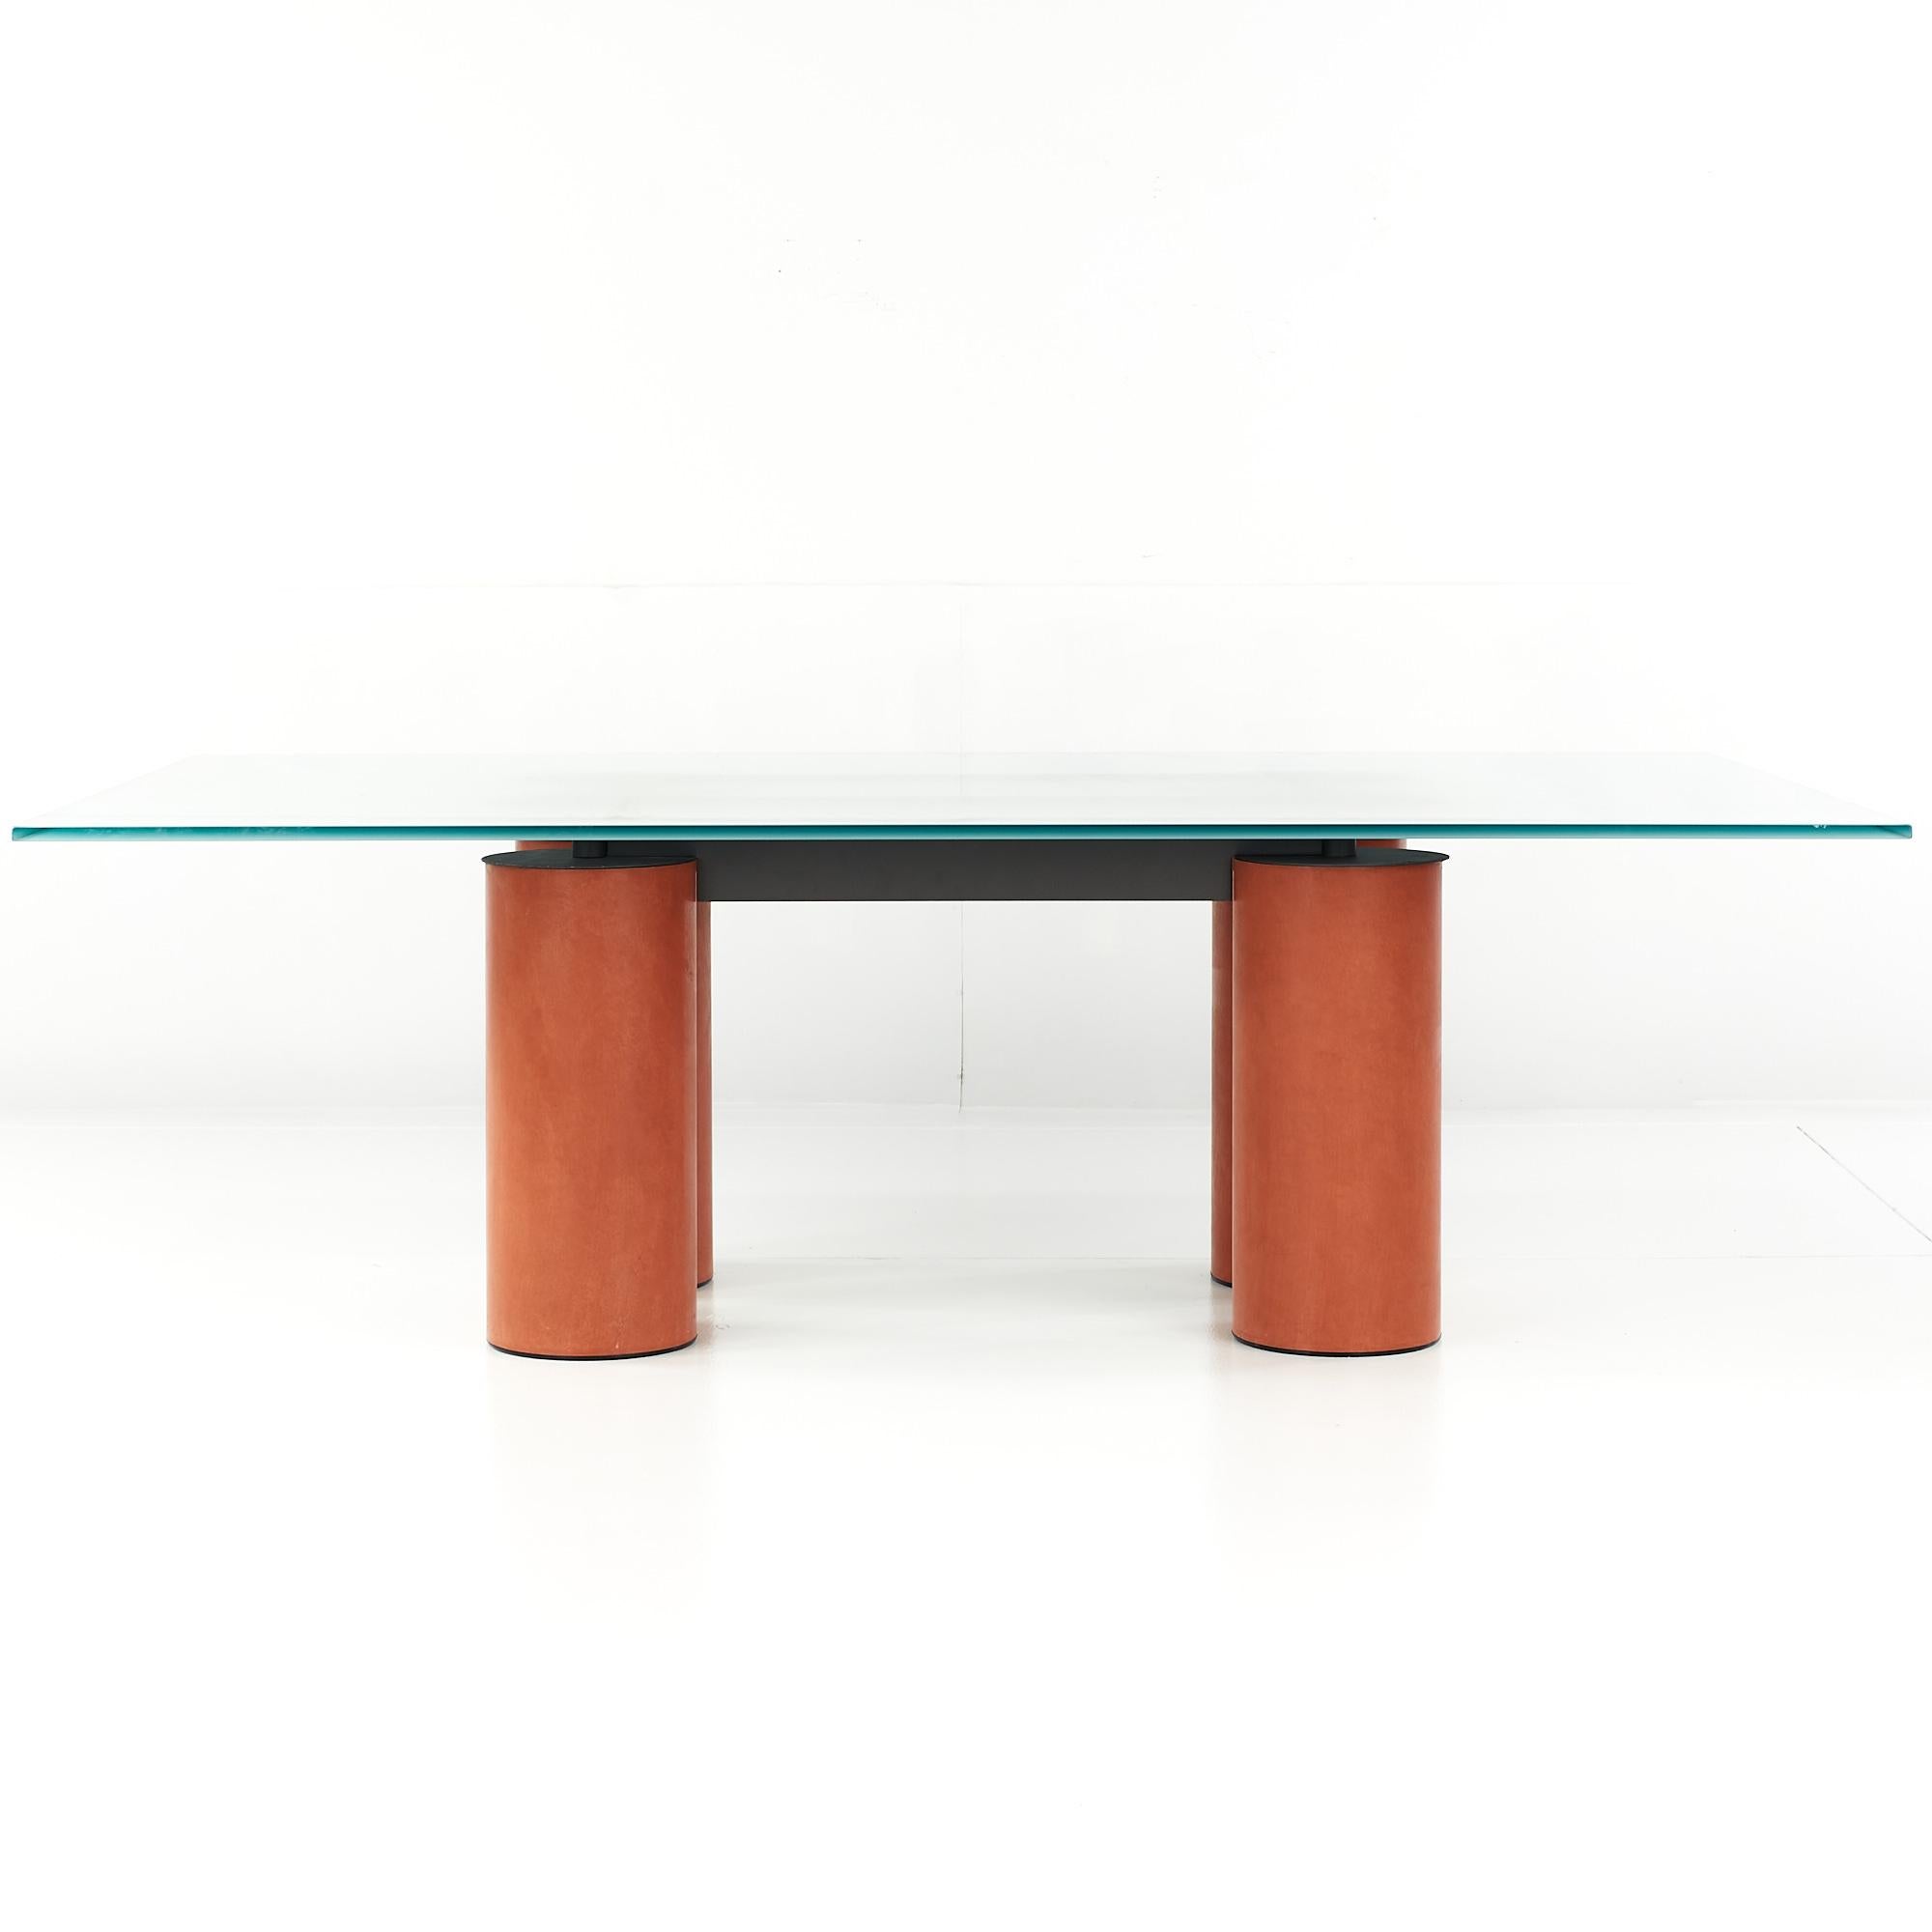 Massimo Vignelli Post Modern glass dining table.

This dining table measures: 90 wide x 53 deep x 28 high, with a chair clearance of 27.25 inches.

All pieces of furniture can be had in what we call restored vintage condition. That means the